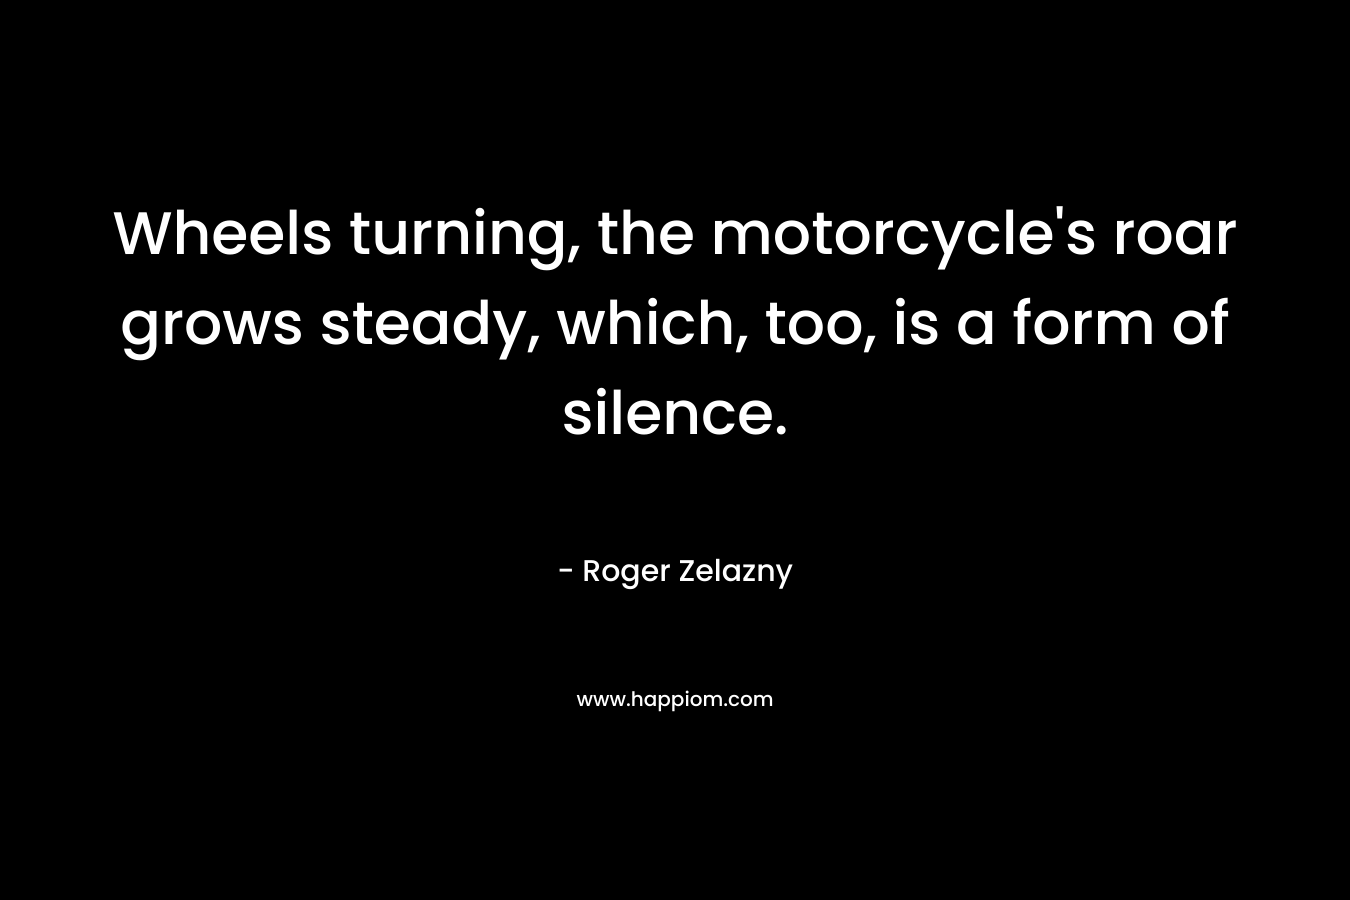 Wheels turning, the motorcycle’s roar grows steady, which, too, is a form of silence. – Roger Zelazny